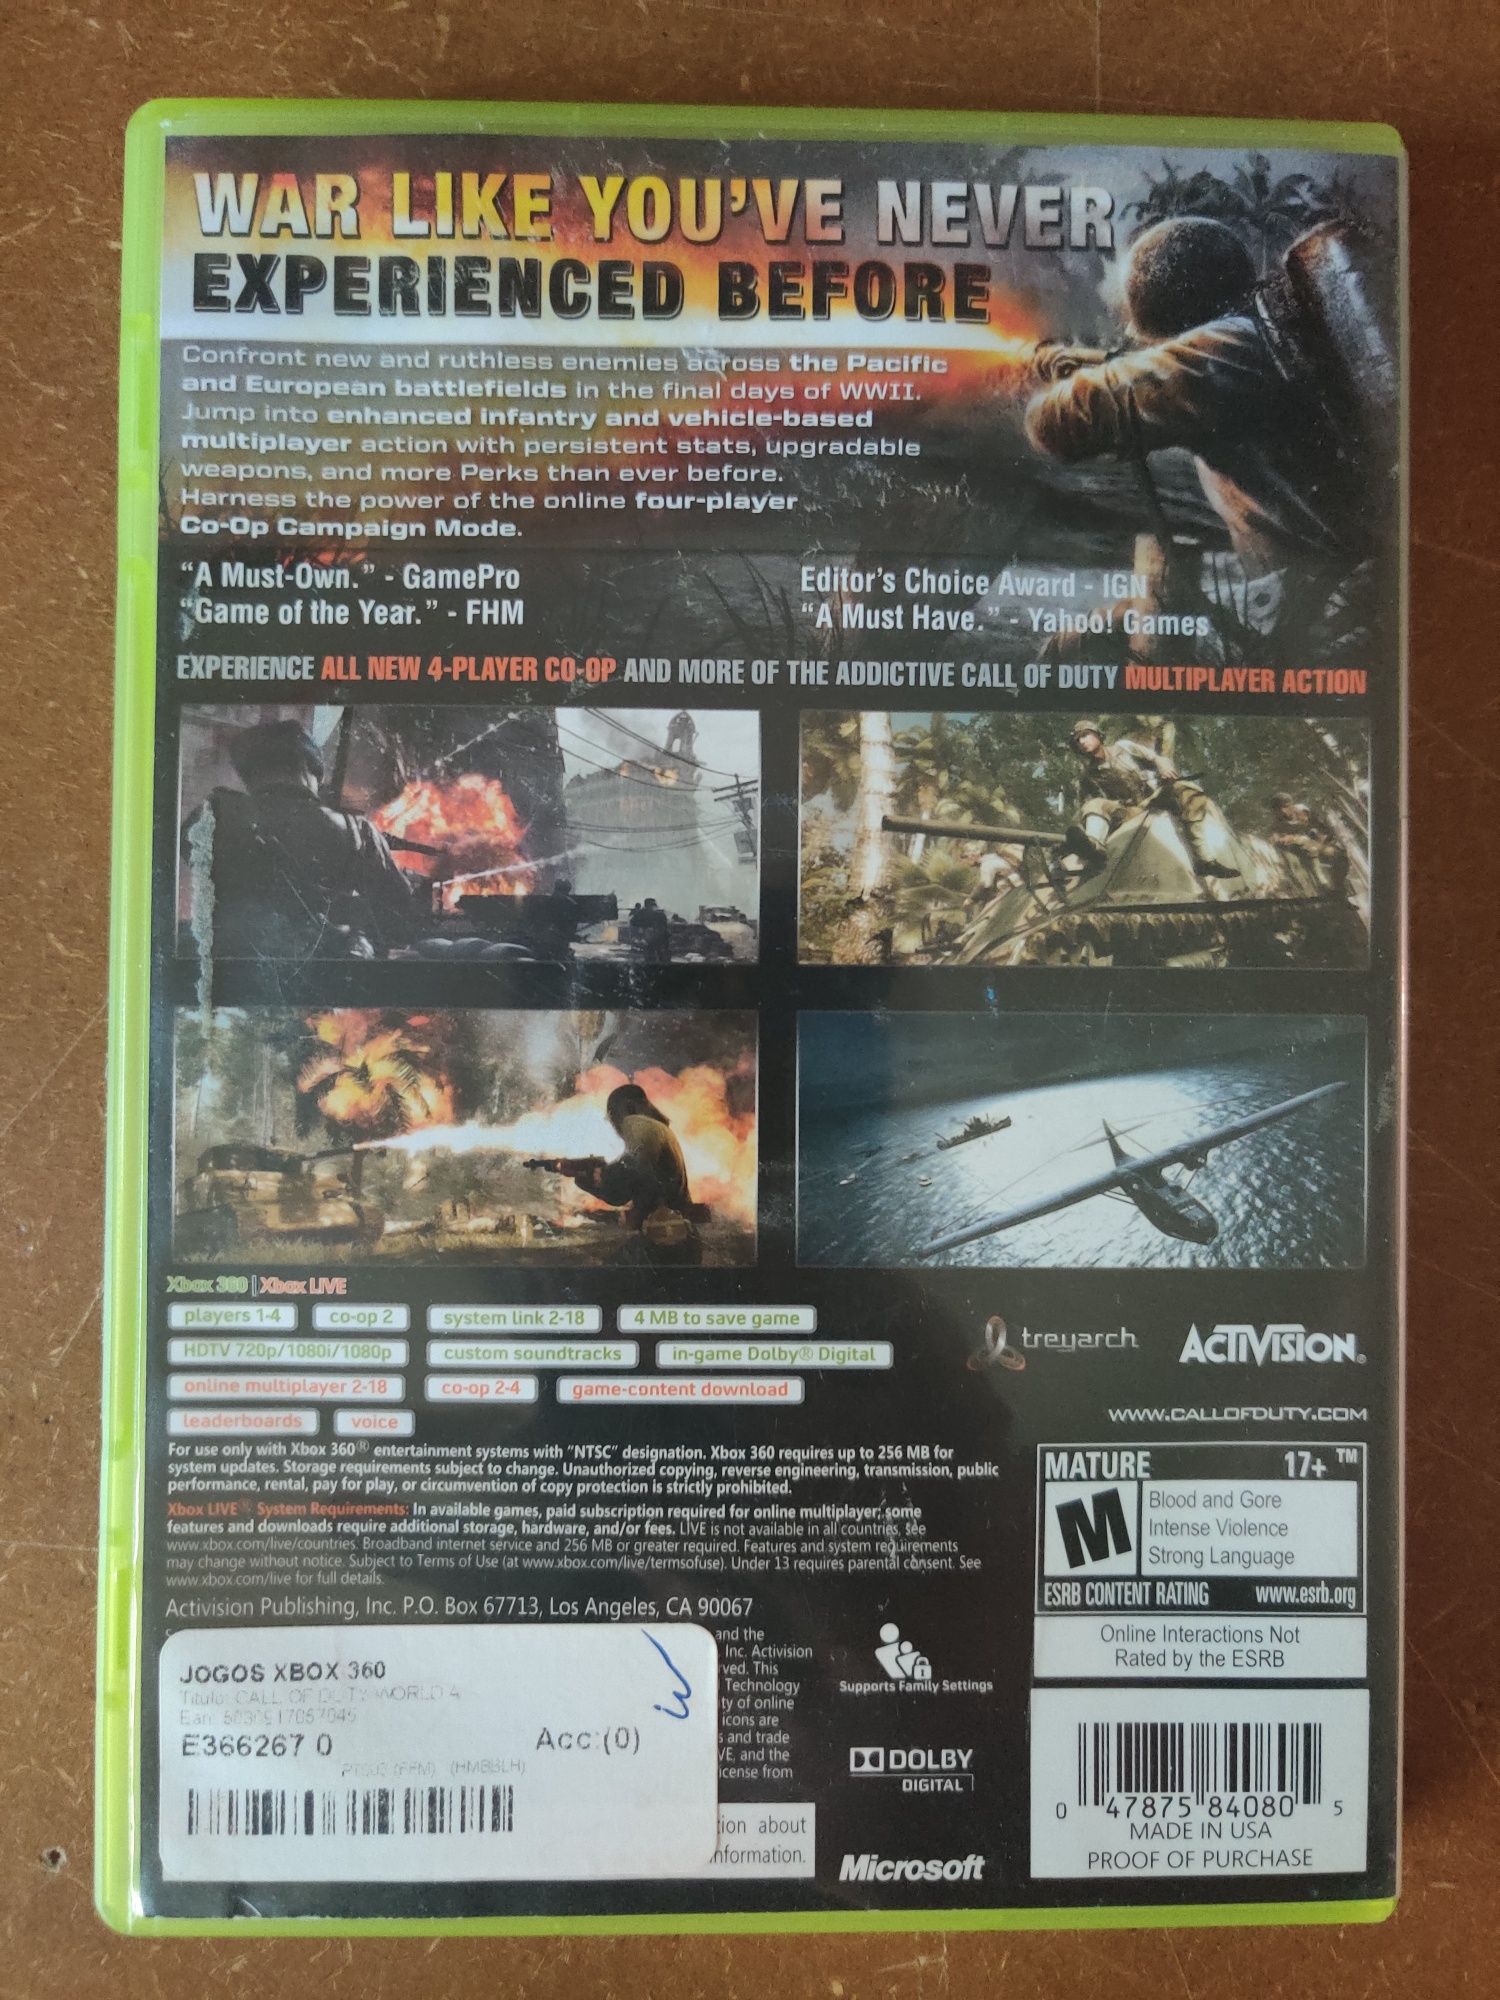 Call of Duty - World at War (Xbox 360/One/Series X)